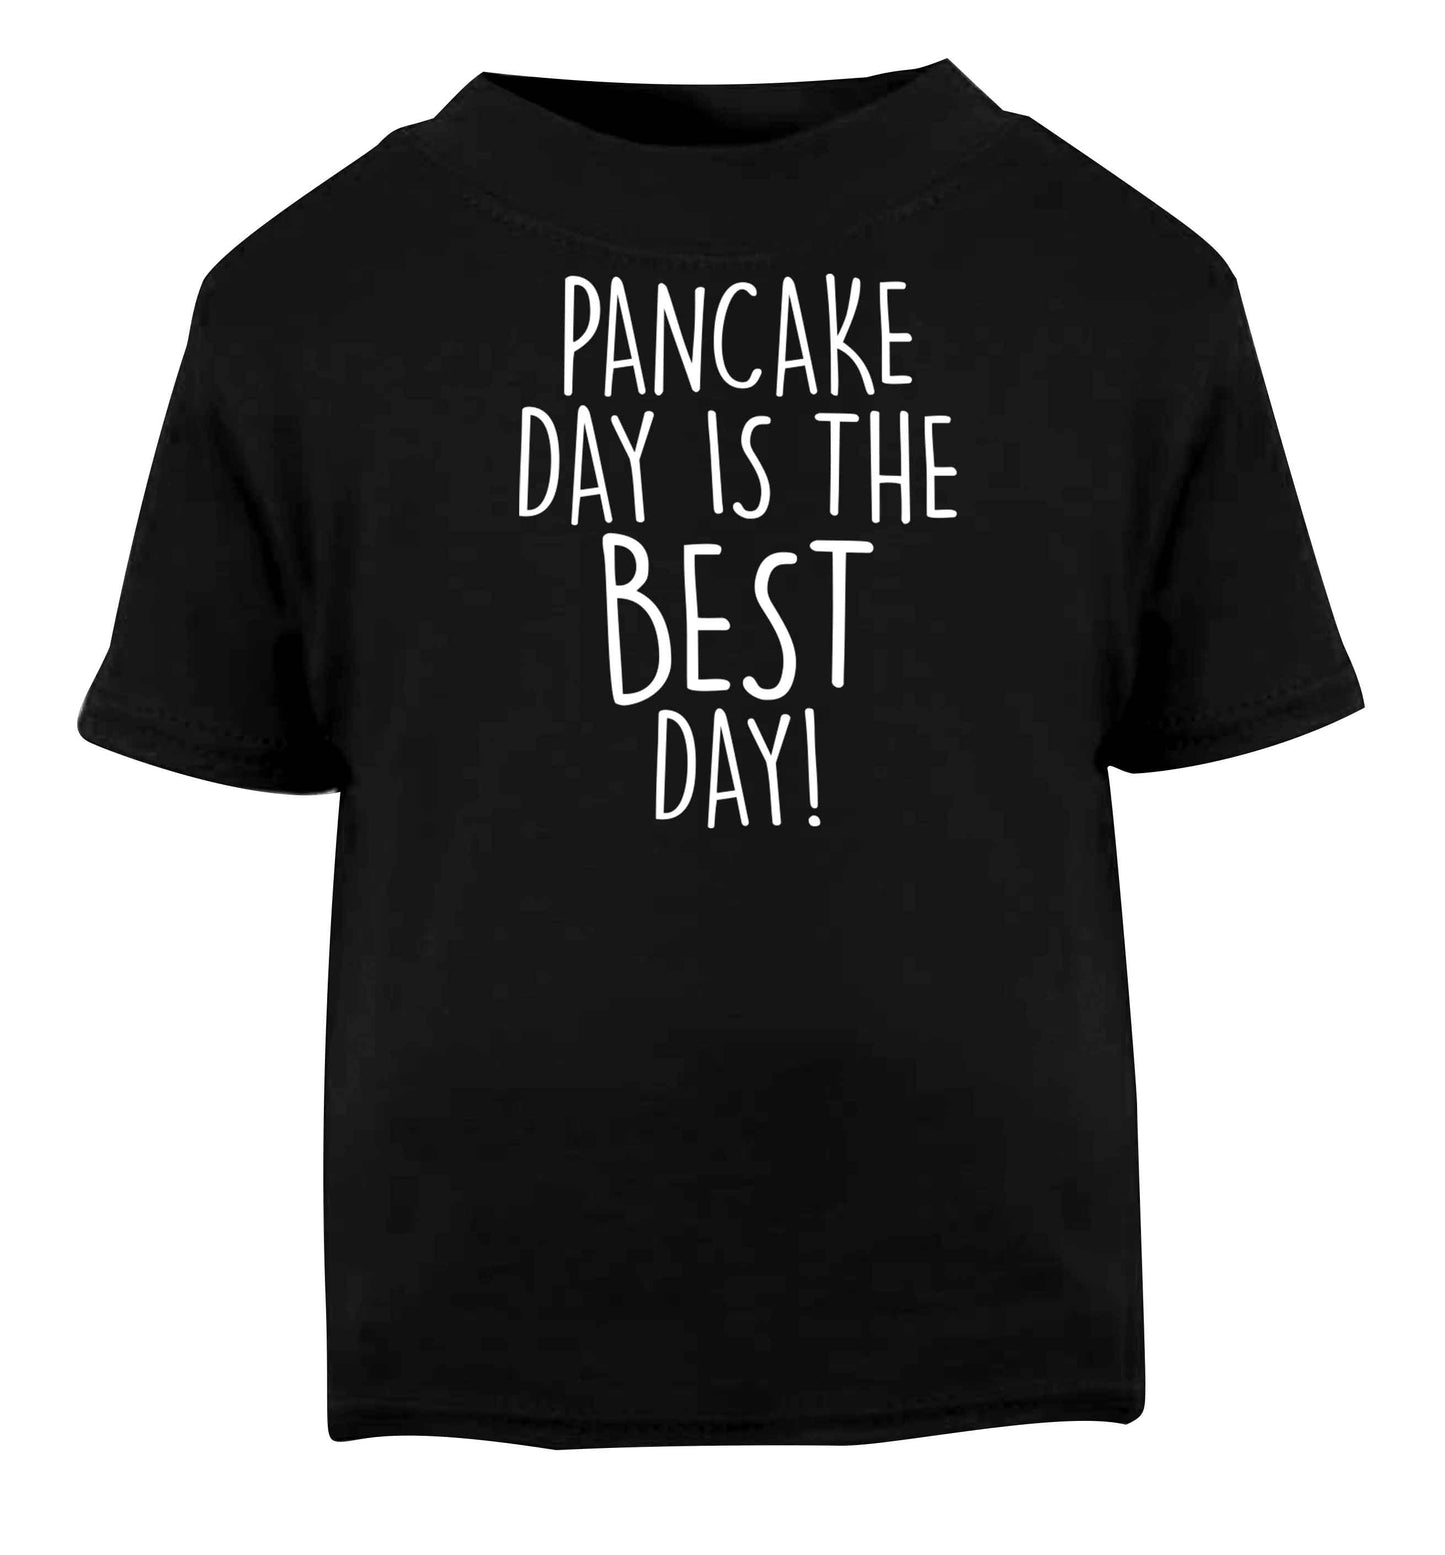 Pancake day is the best day Black baby toddler Tshirt 2 years